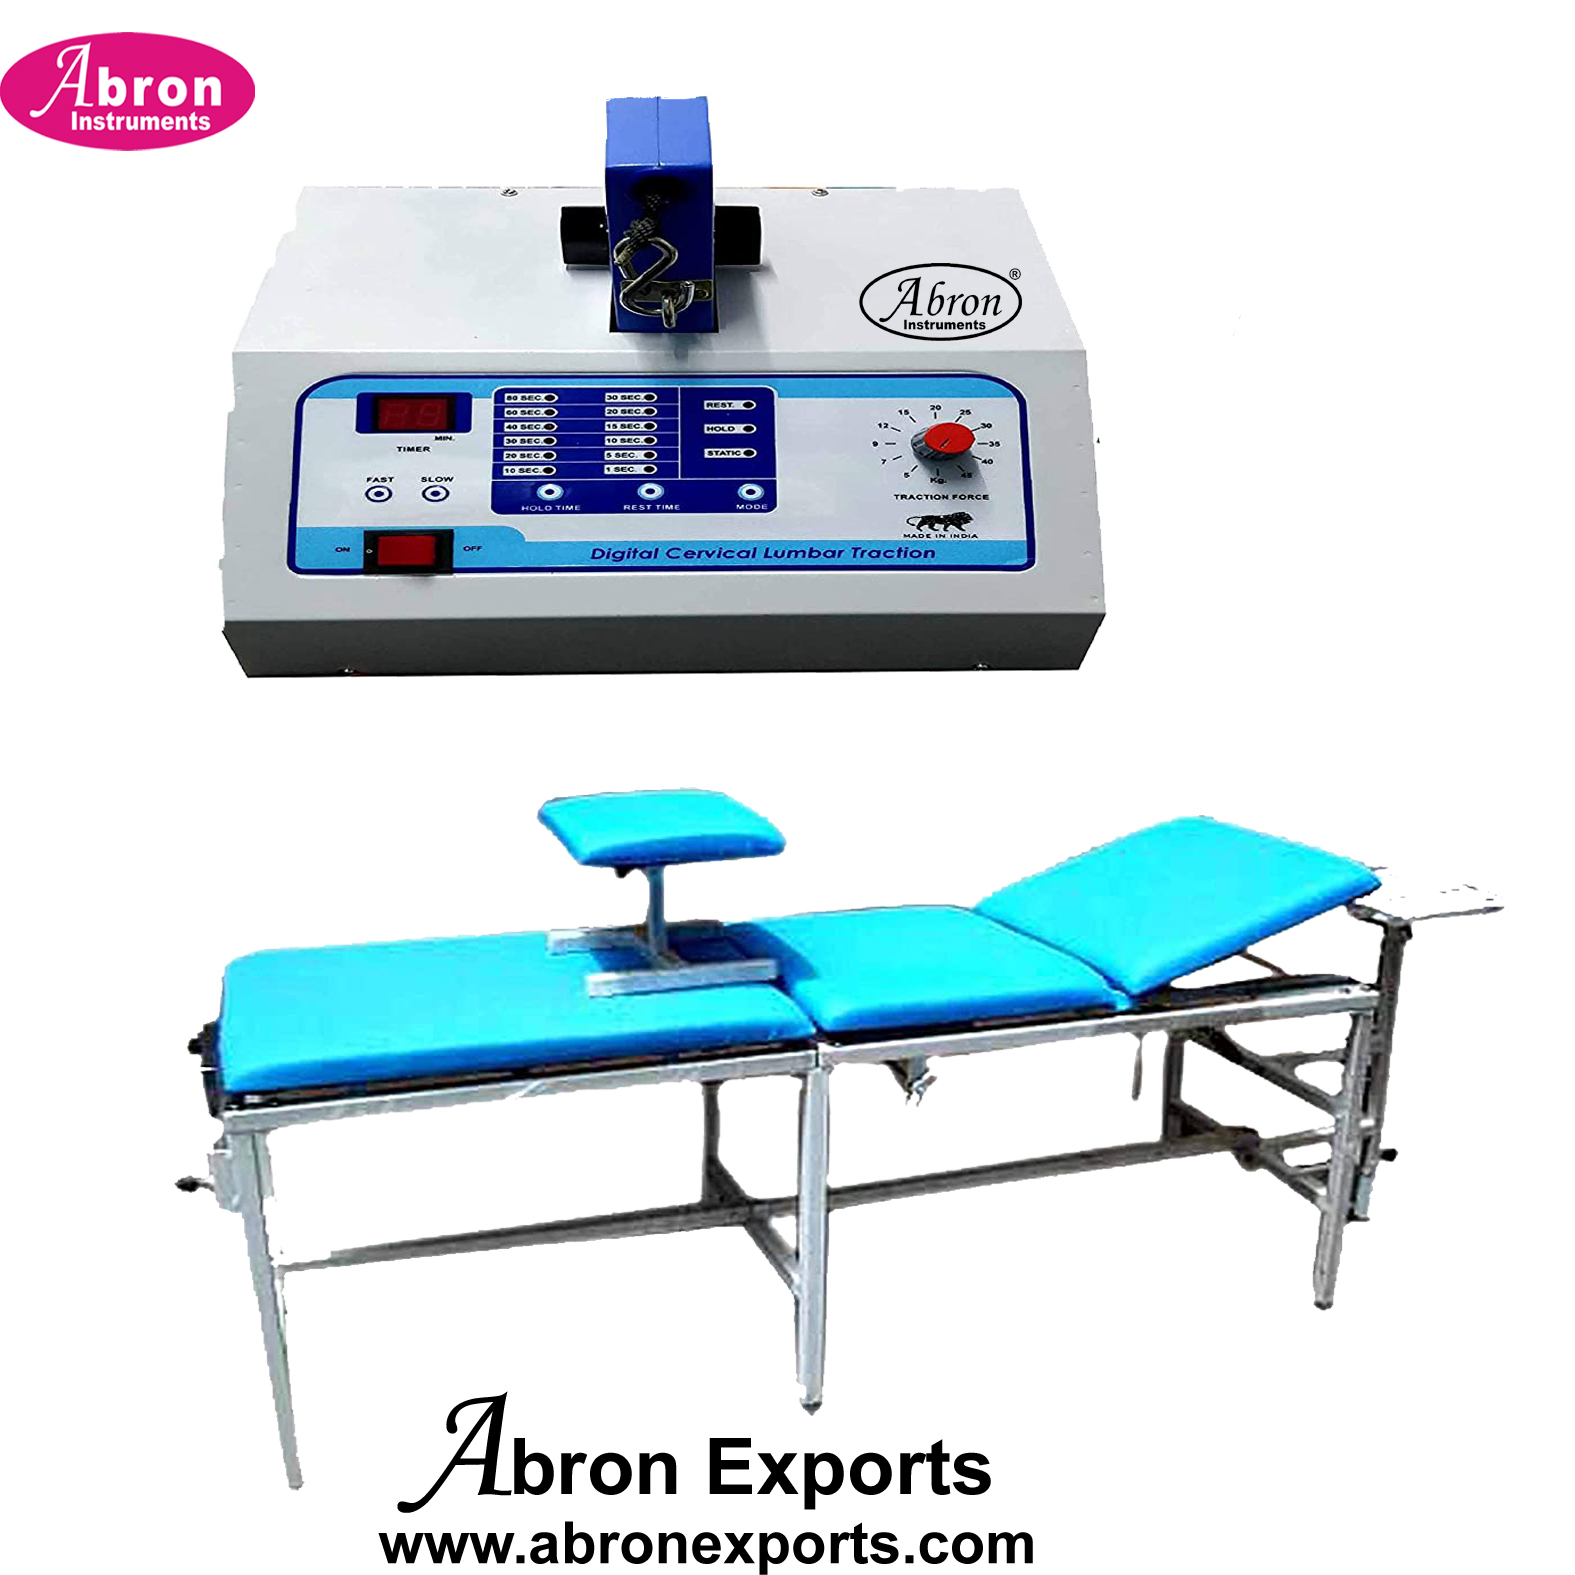 Physiotherapy Traction Machine with Table 3 Fold Equipment Hospital Medical Abron ABM-1921-TM 